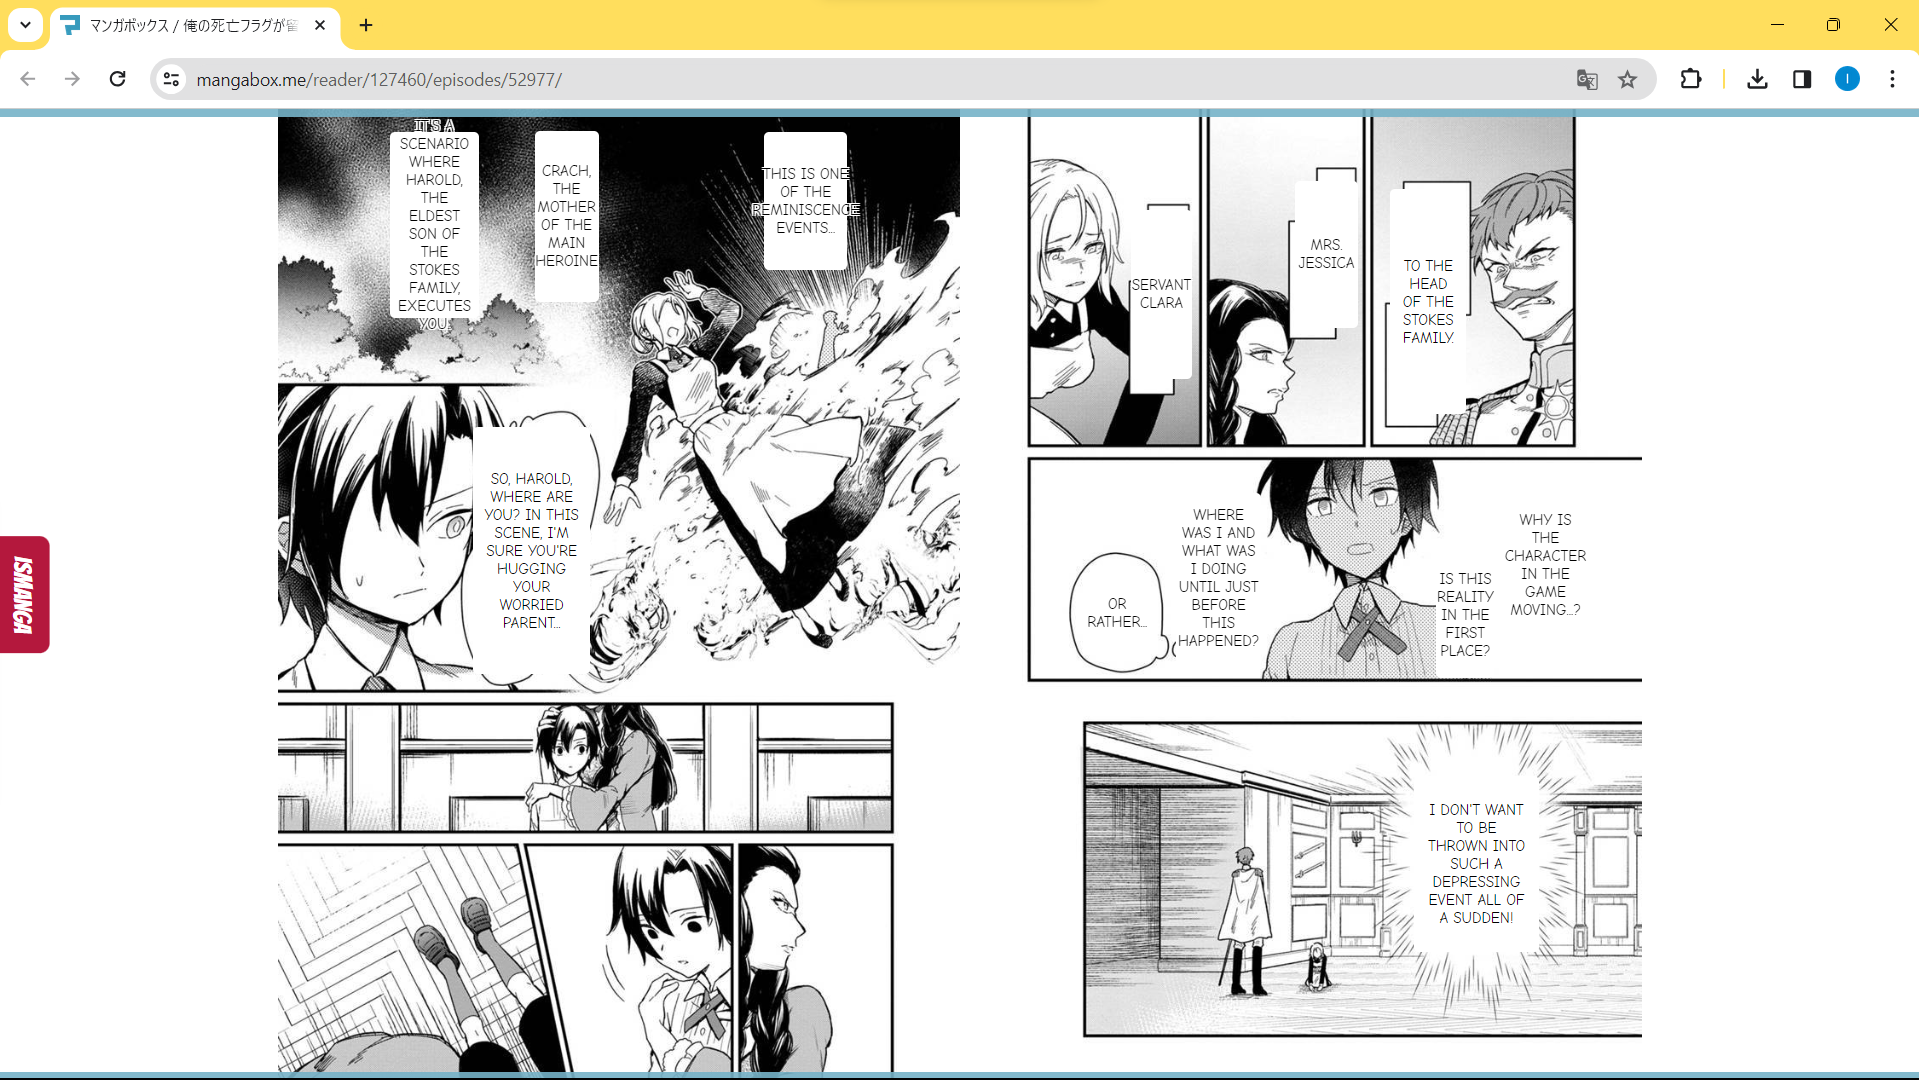 Manga Box: Translate manga in your preferred language with just one click using the Chrome extension!